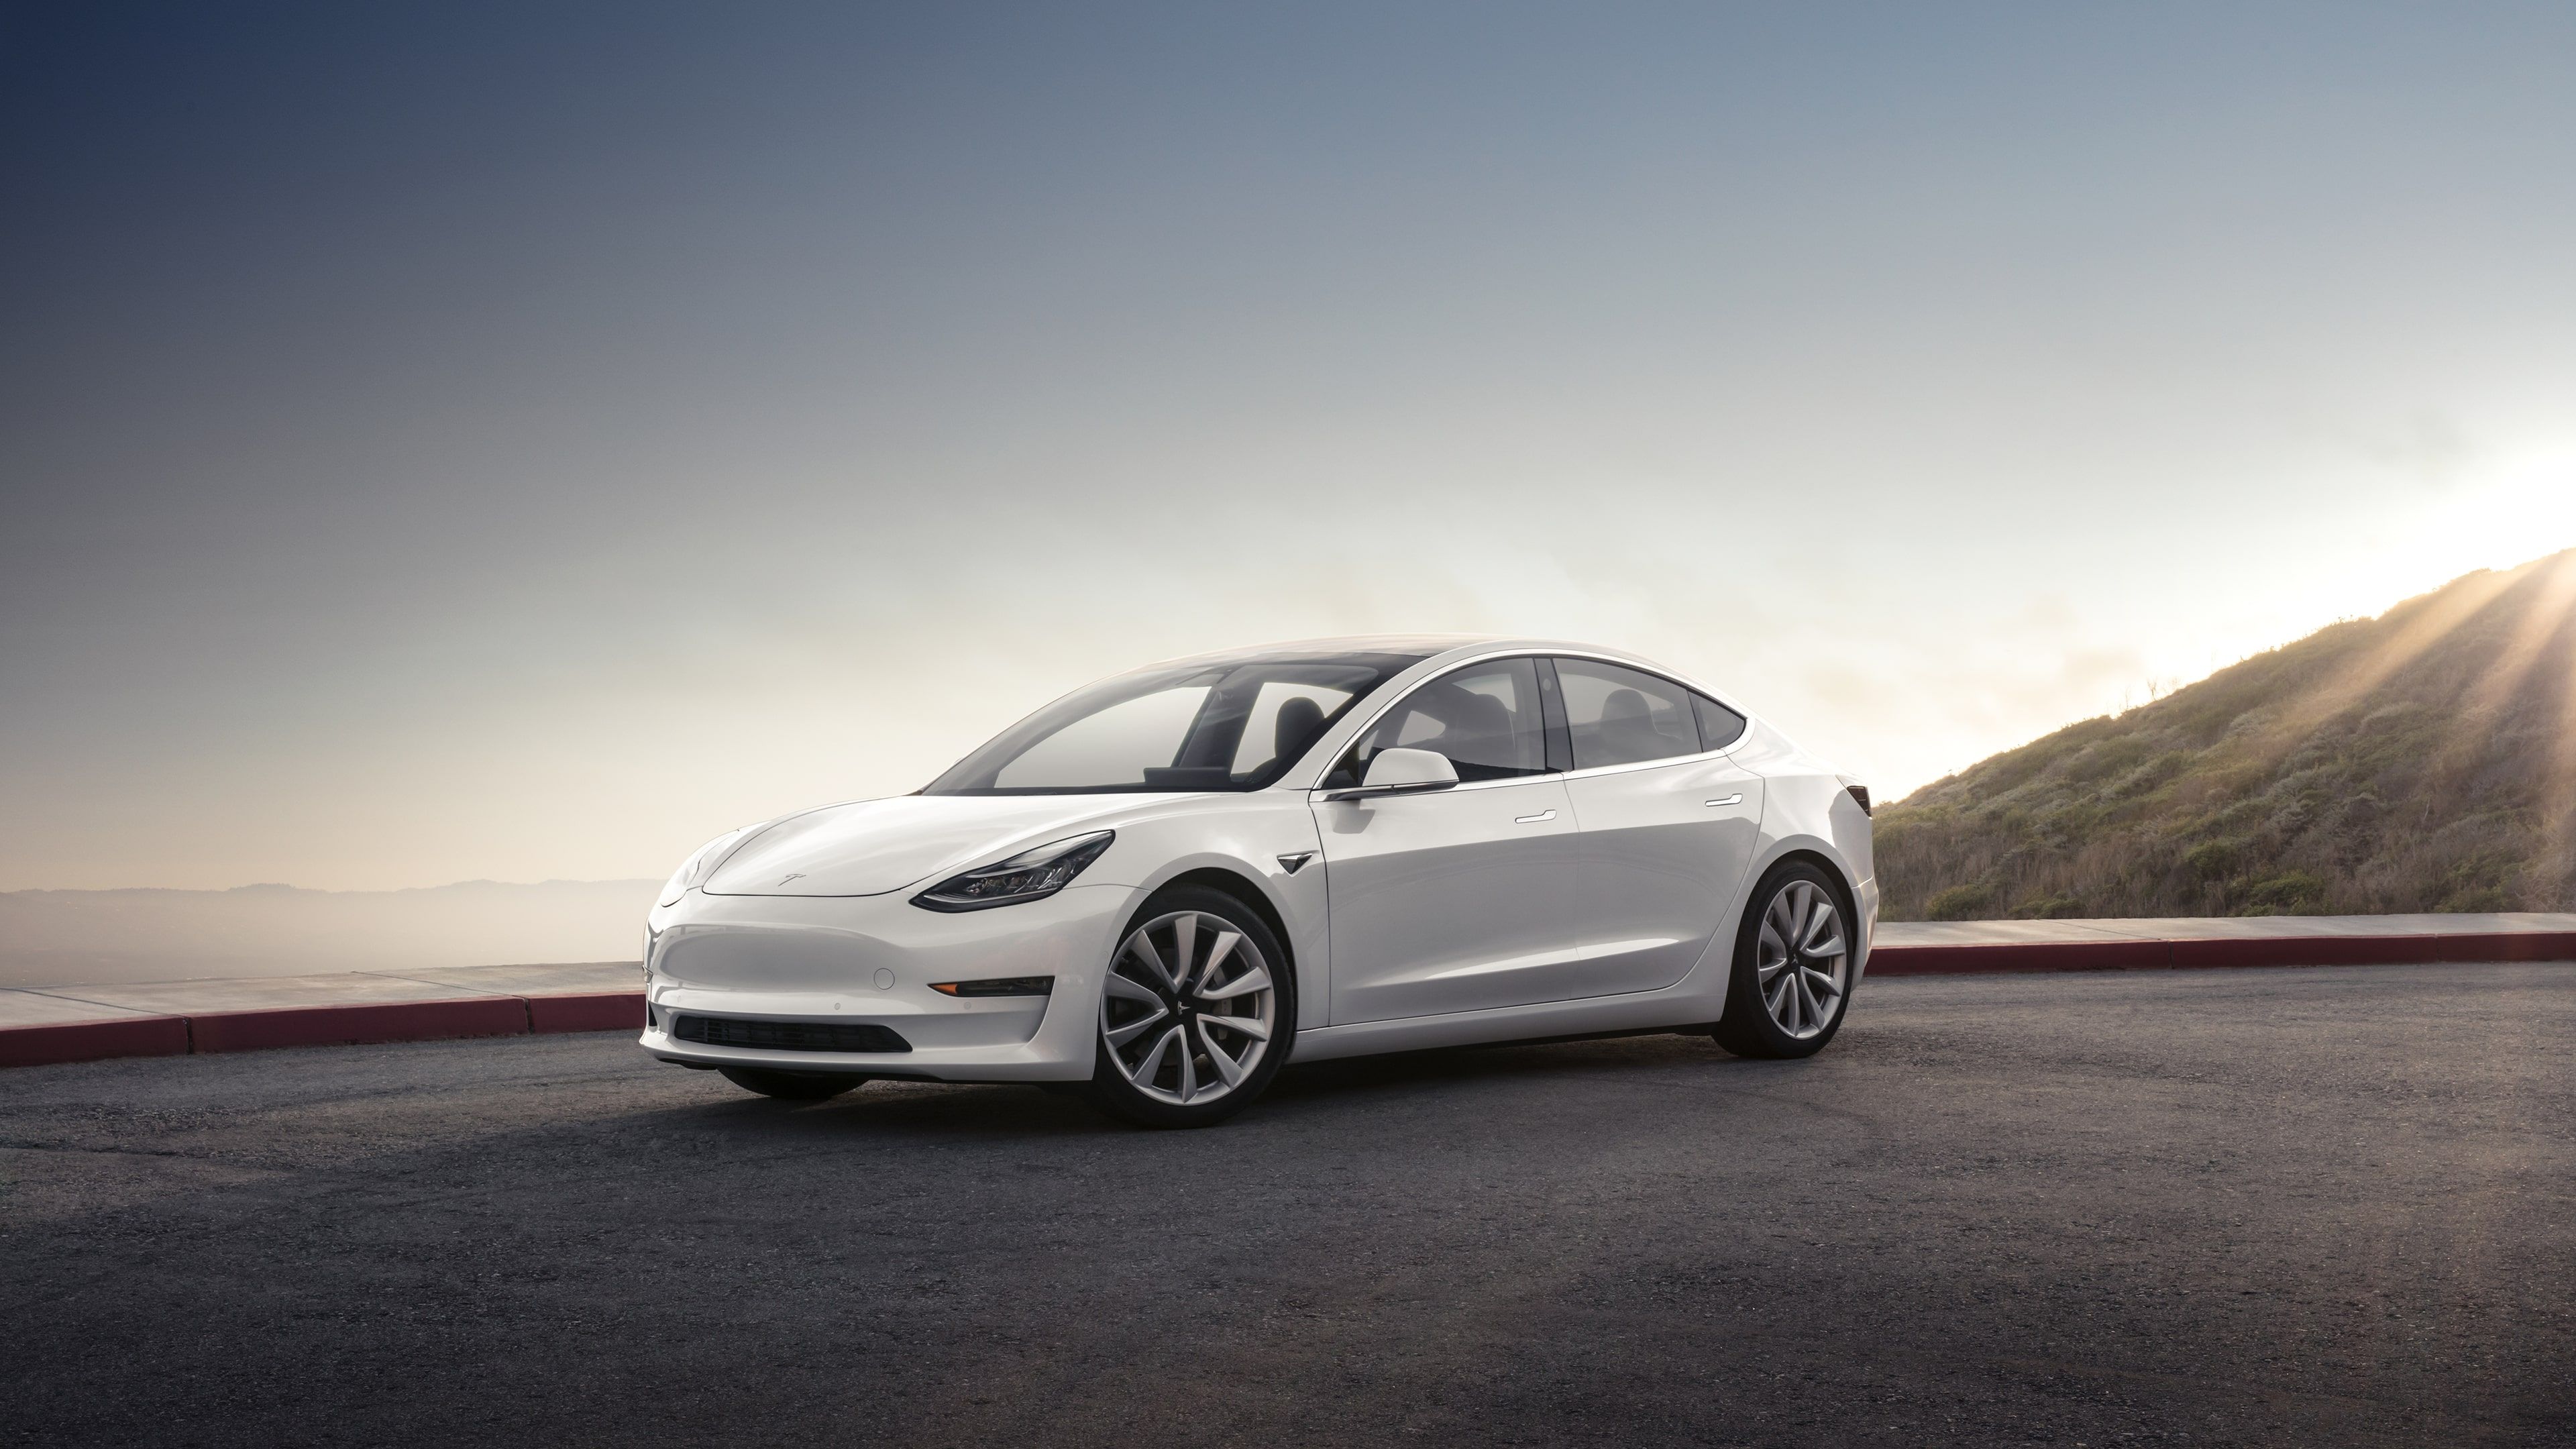 2020 Tesla Offers New Mid Range Model 3 To Tempt EV Buyers, But Base Trim Buyers Might Be Out Of Luck